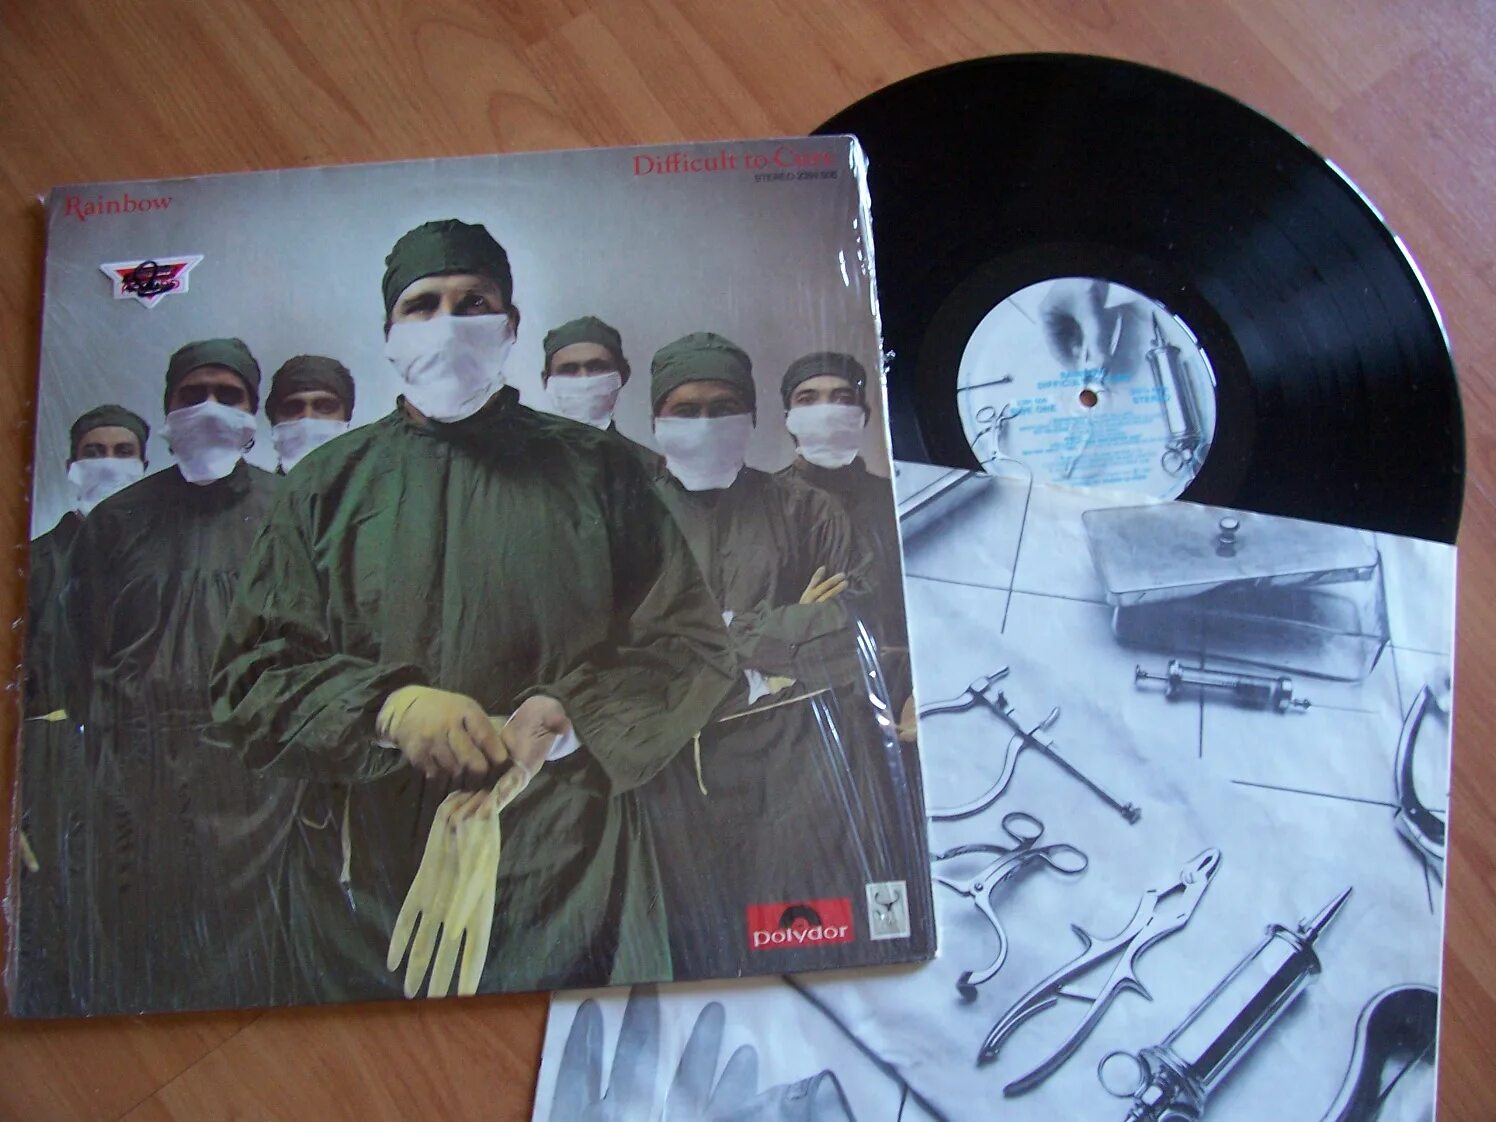 Difficult to Cure (1981) Rainbow буклеты. Blackmore Ritchie Rainbow - 1981 - difficult to Cure.